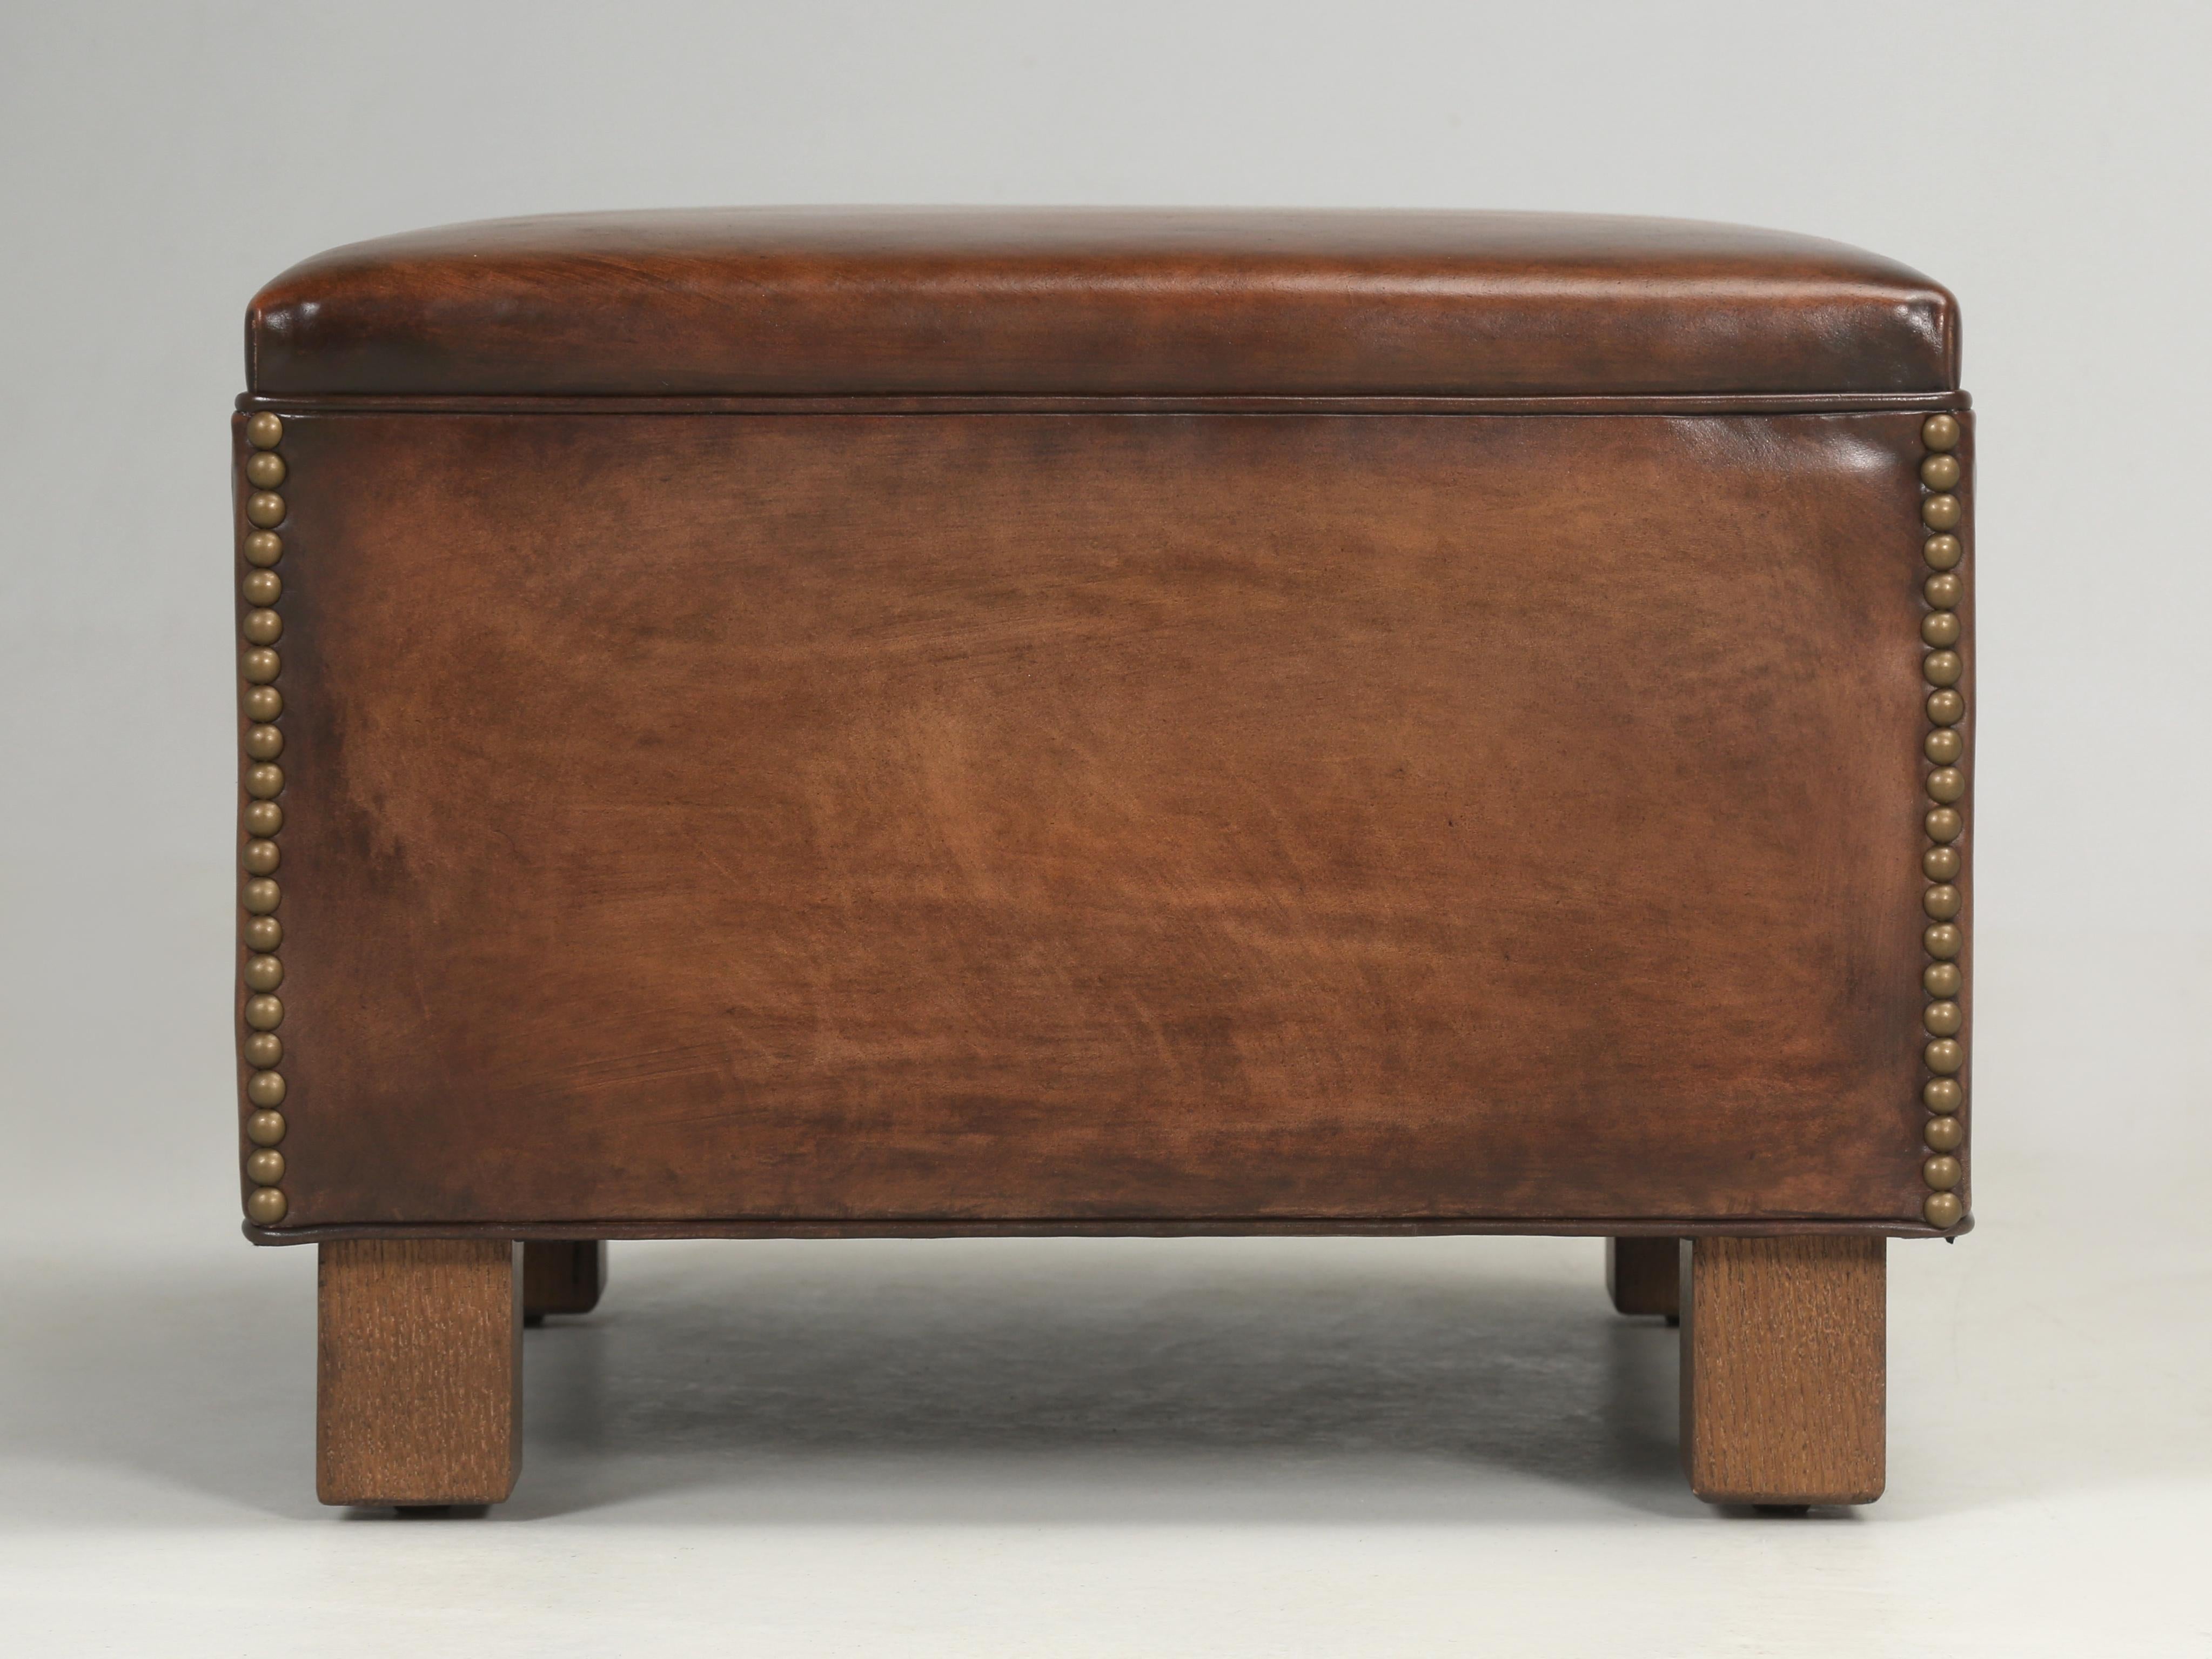 Hand-Crafted French Art Deco Club Chair Stool or Ottoman in Aged Patina Available in Any Size For Sale